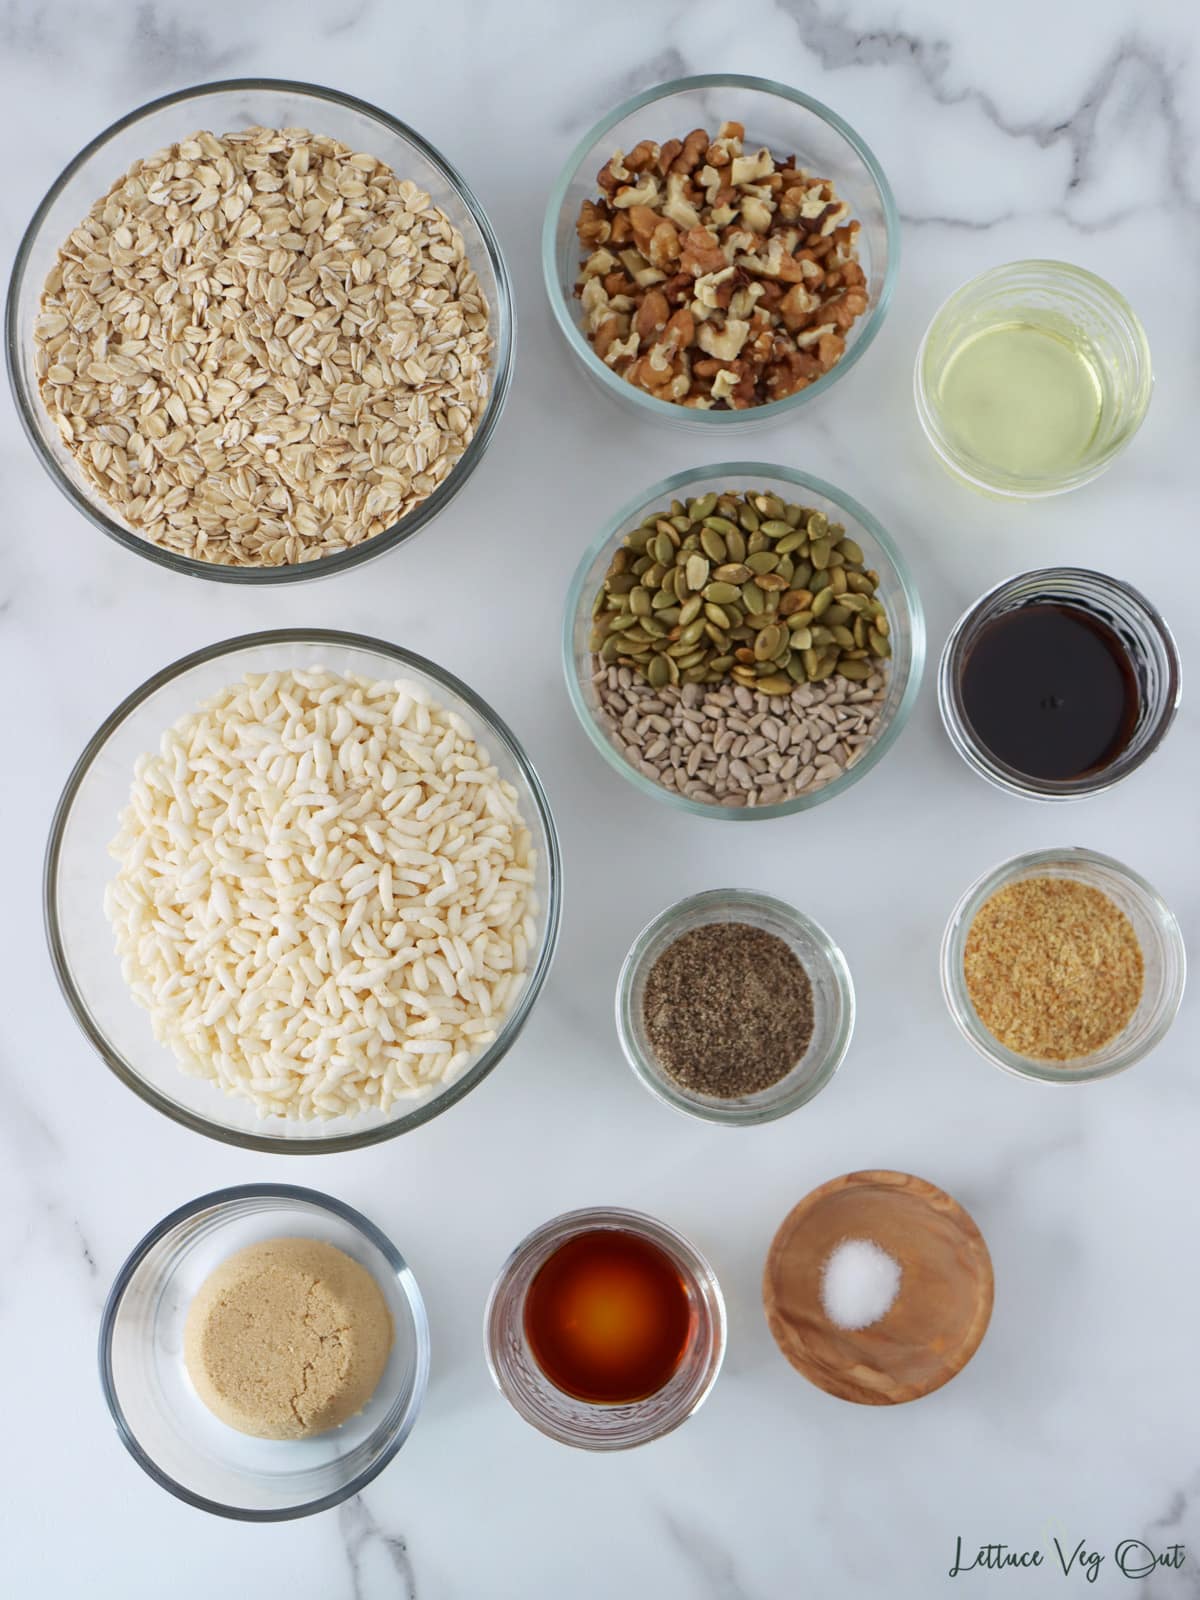 Small glass dishes with ingredients for puffed rice granola.